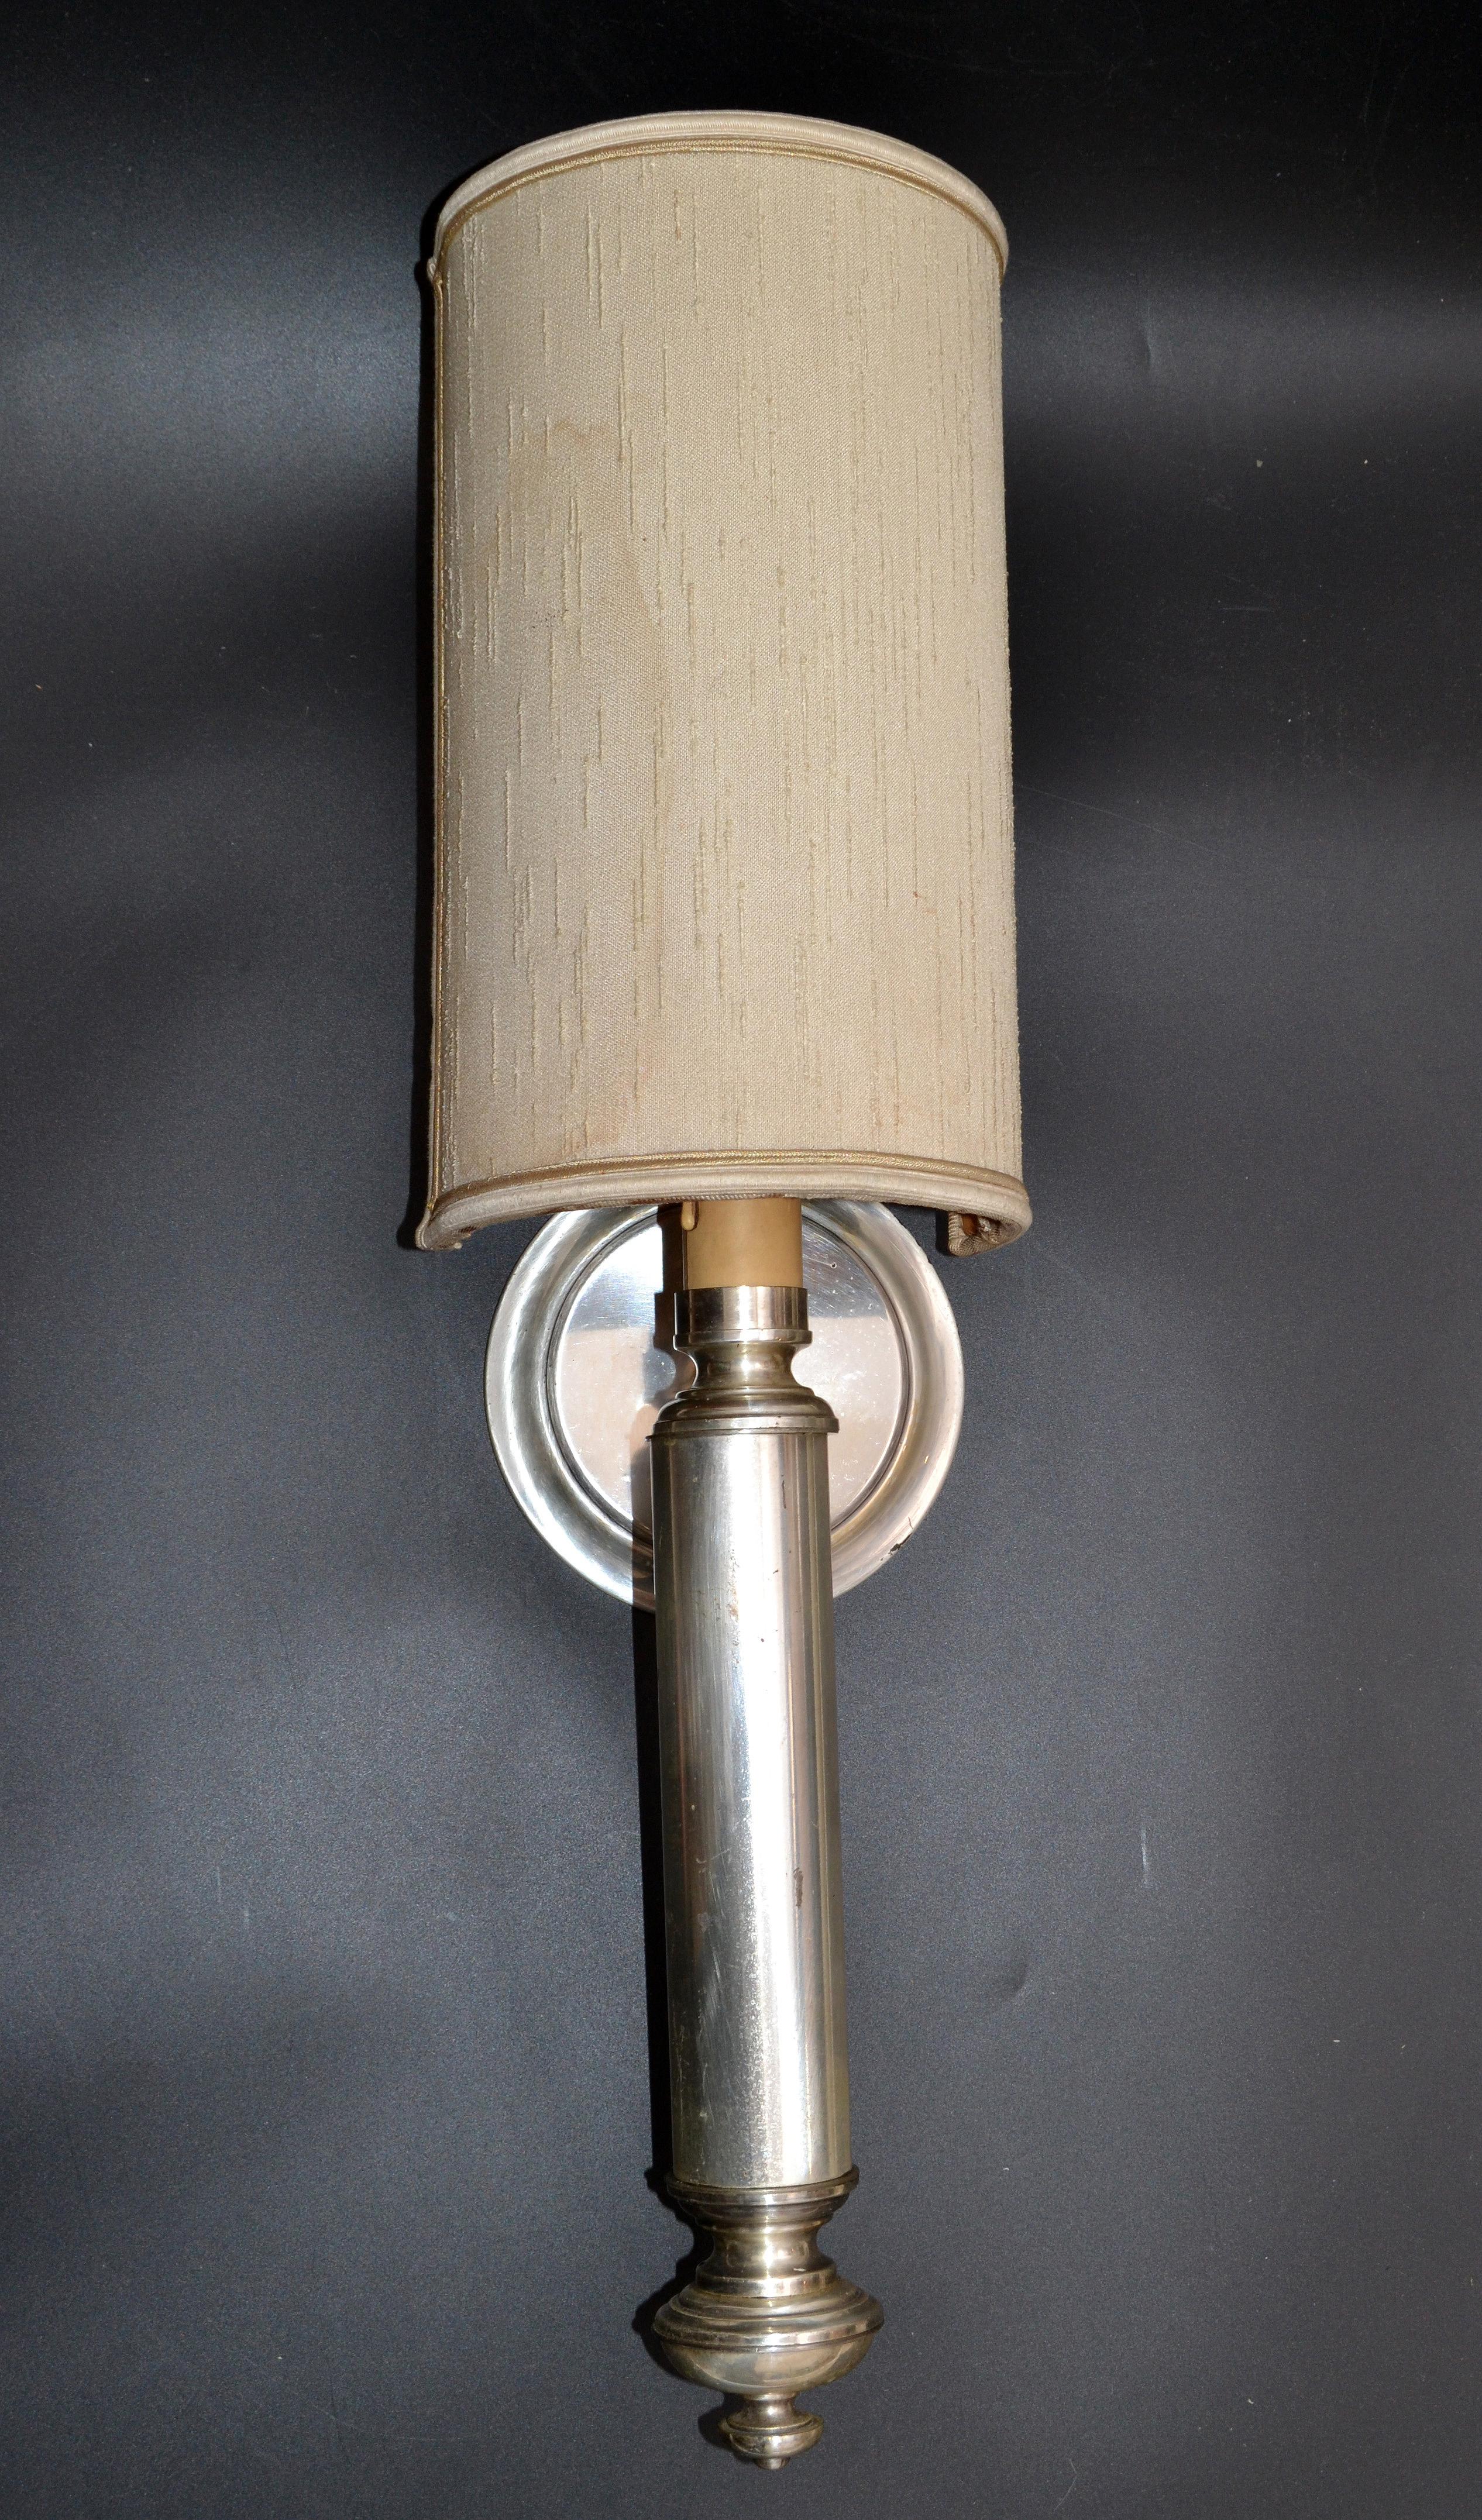 French Vintage Maison Lancel Wall Sconces Silver Finish with Original Half Shade, Pair For Sale